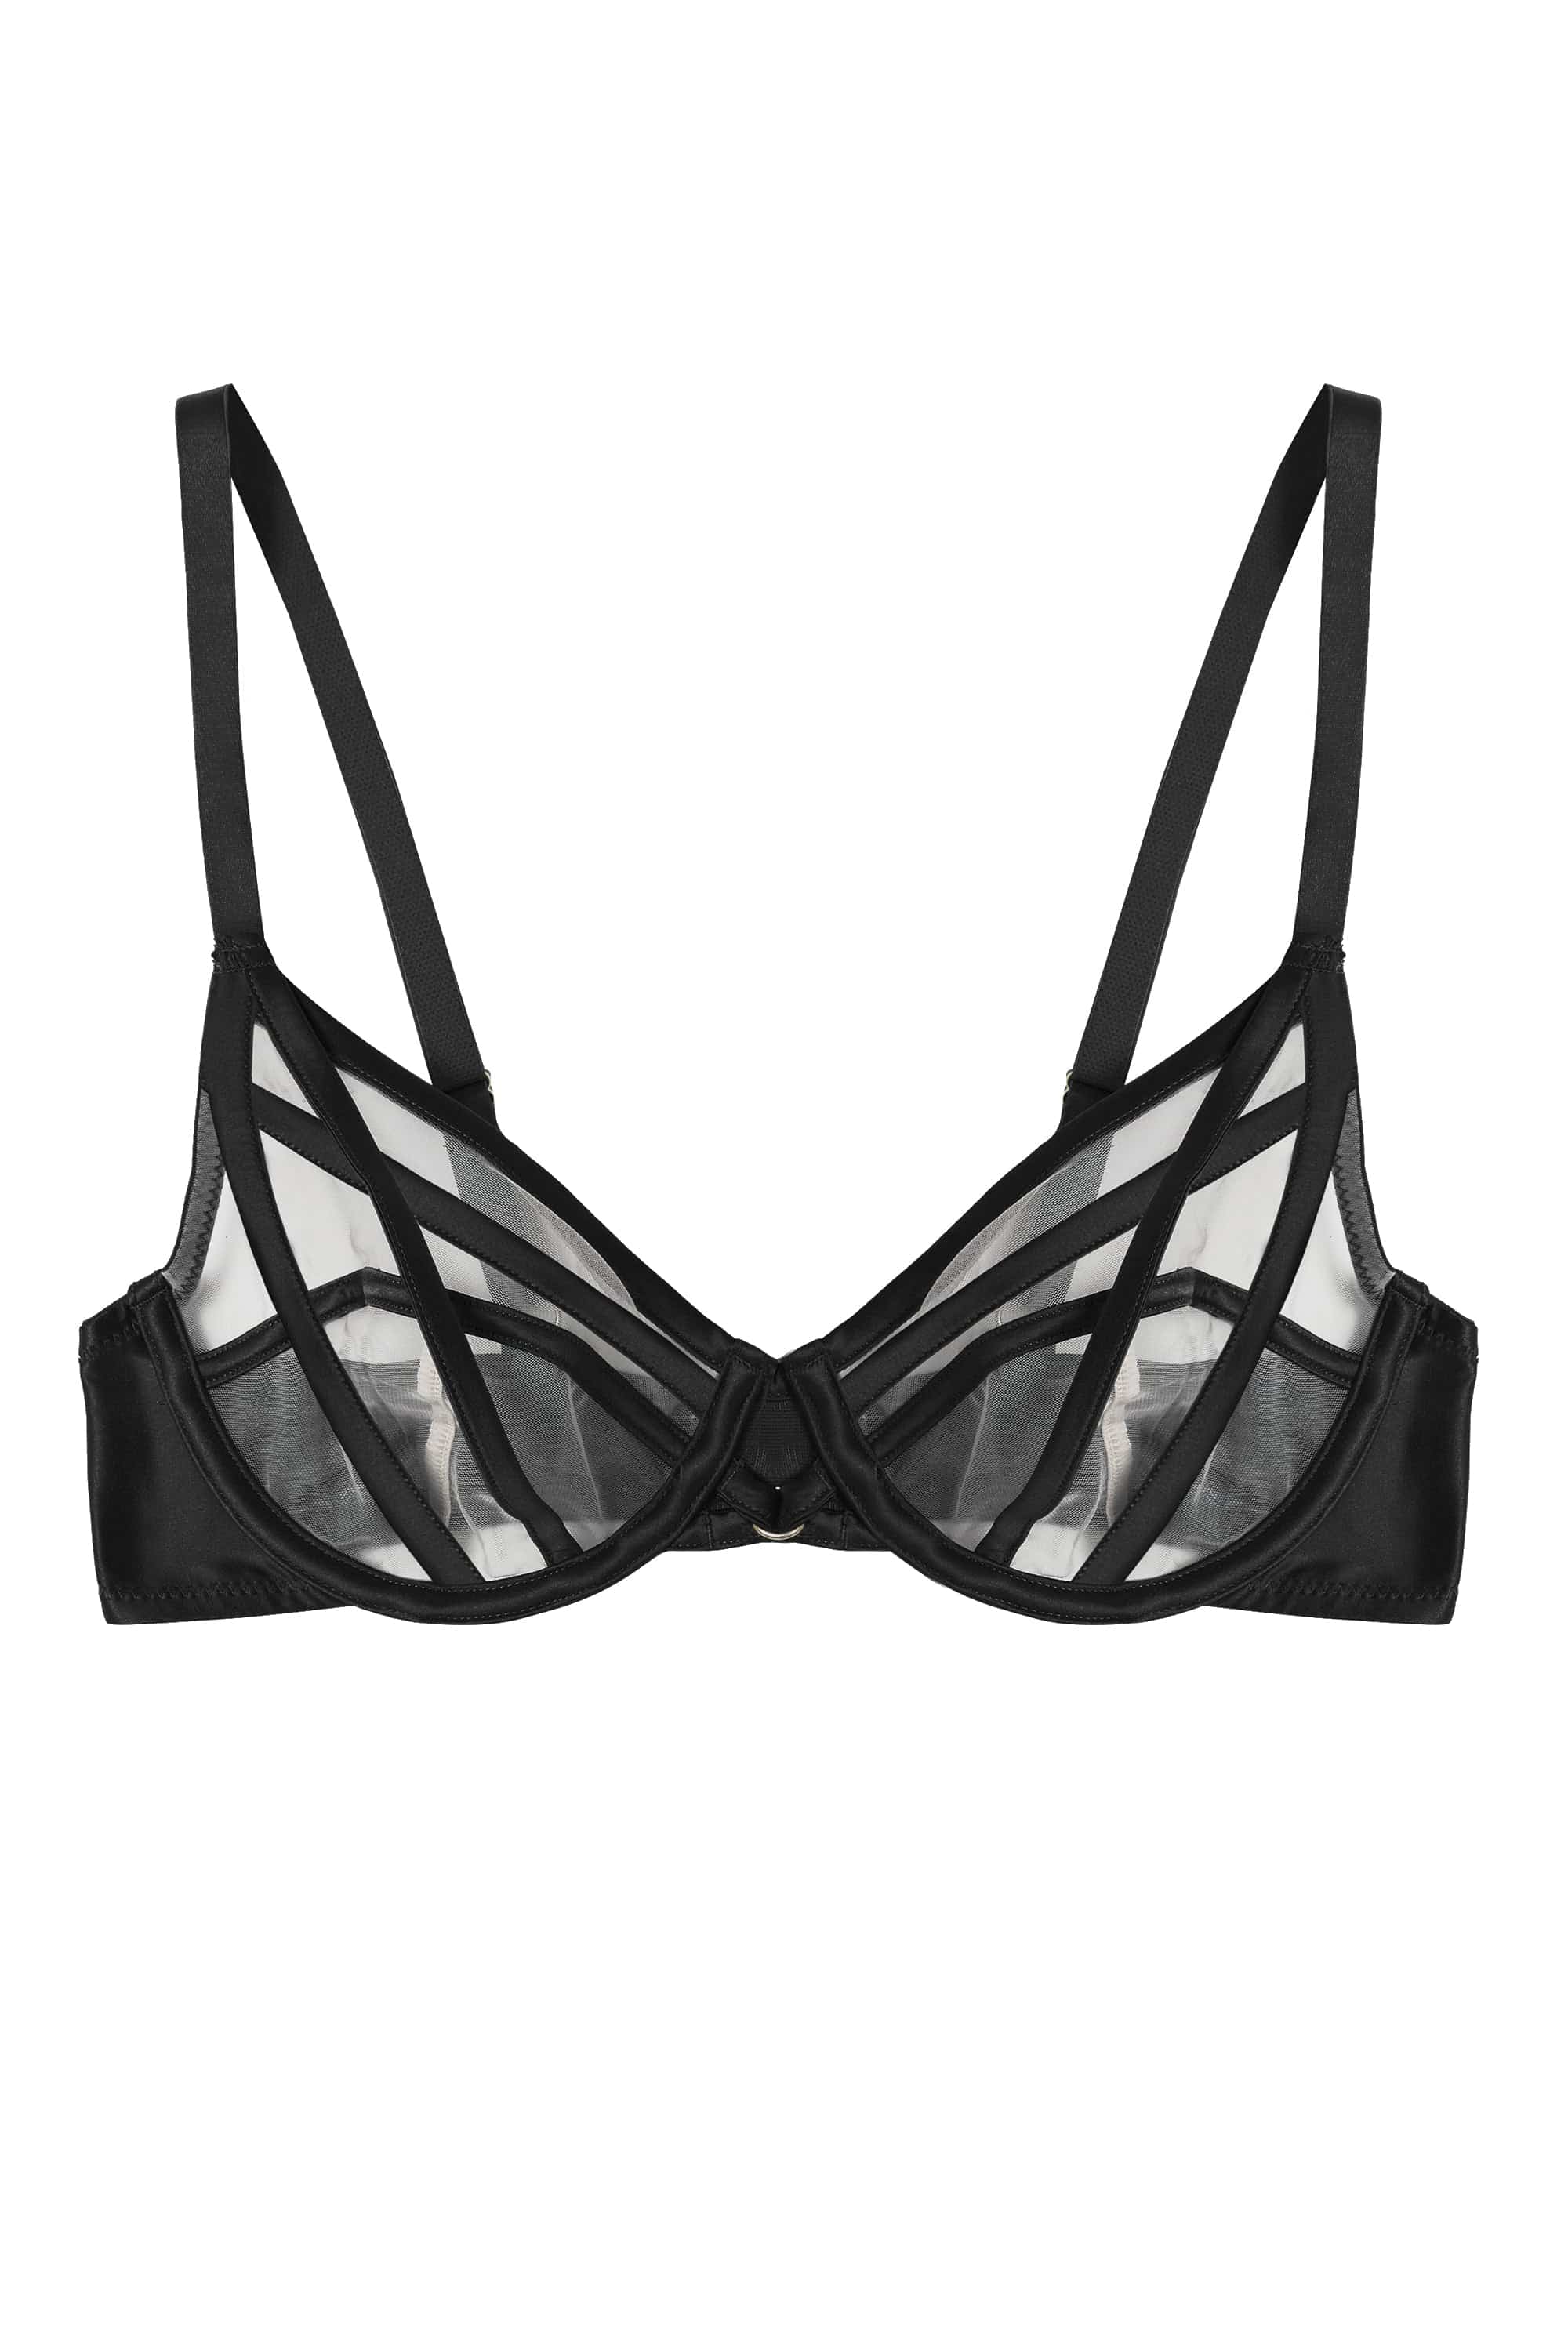 Product Cut Out of black mesh bra